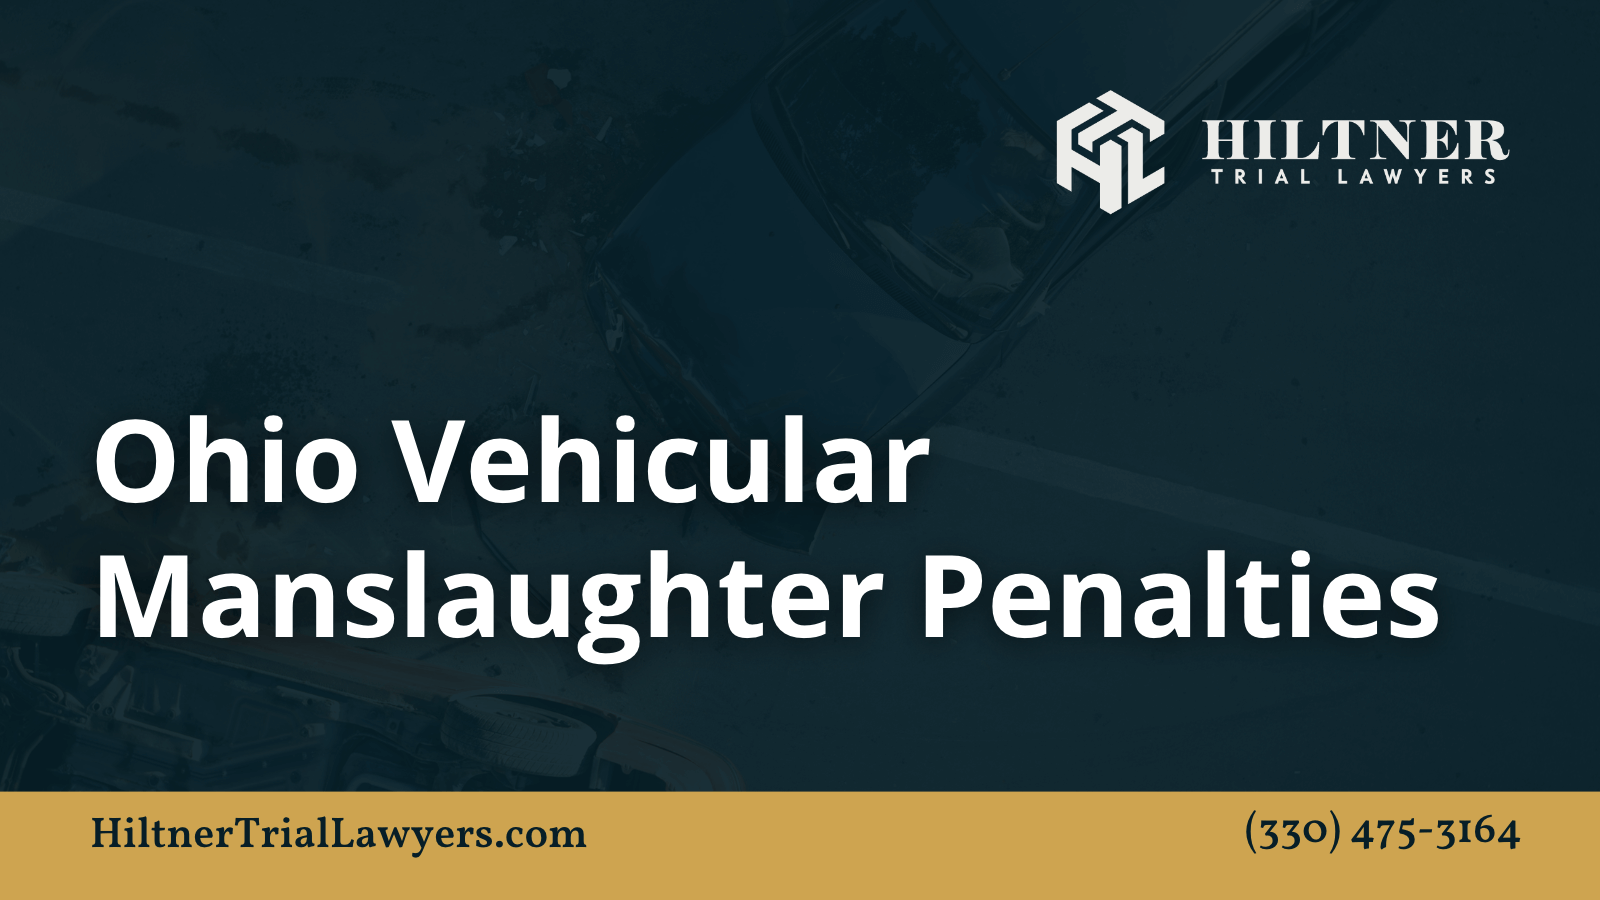 Ohio Vehicular Manslaughter Penalties - Hiltner Trial Lawyers Ohio - max hiltner